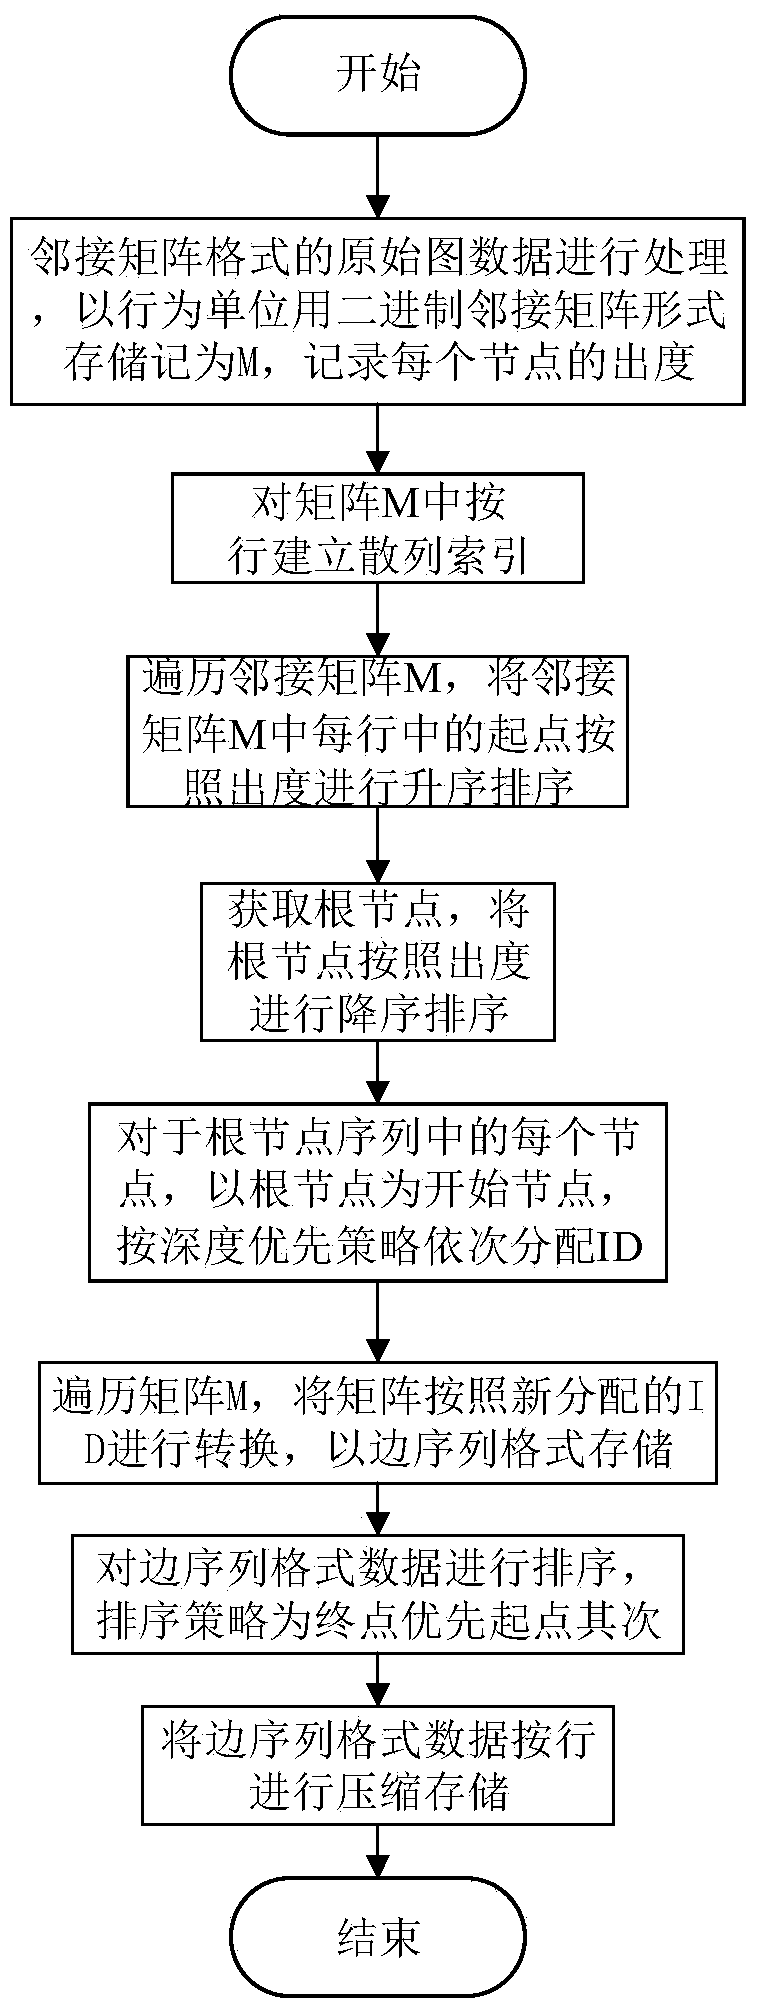 Compression and storage method for large-scale image data